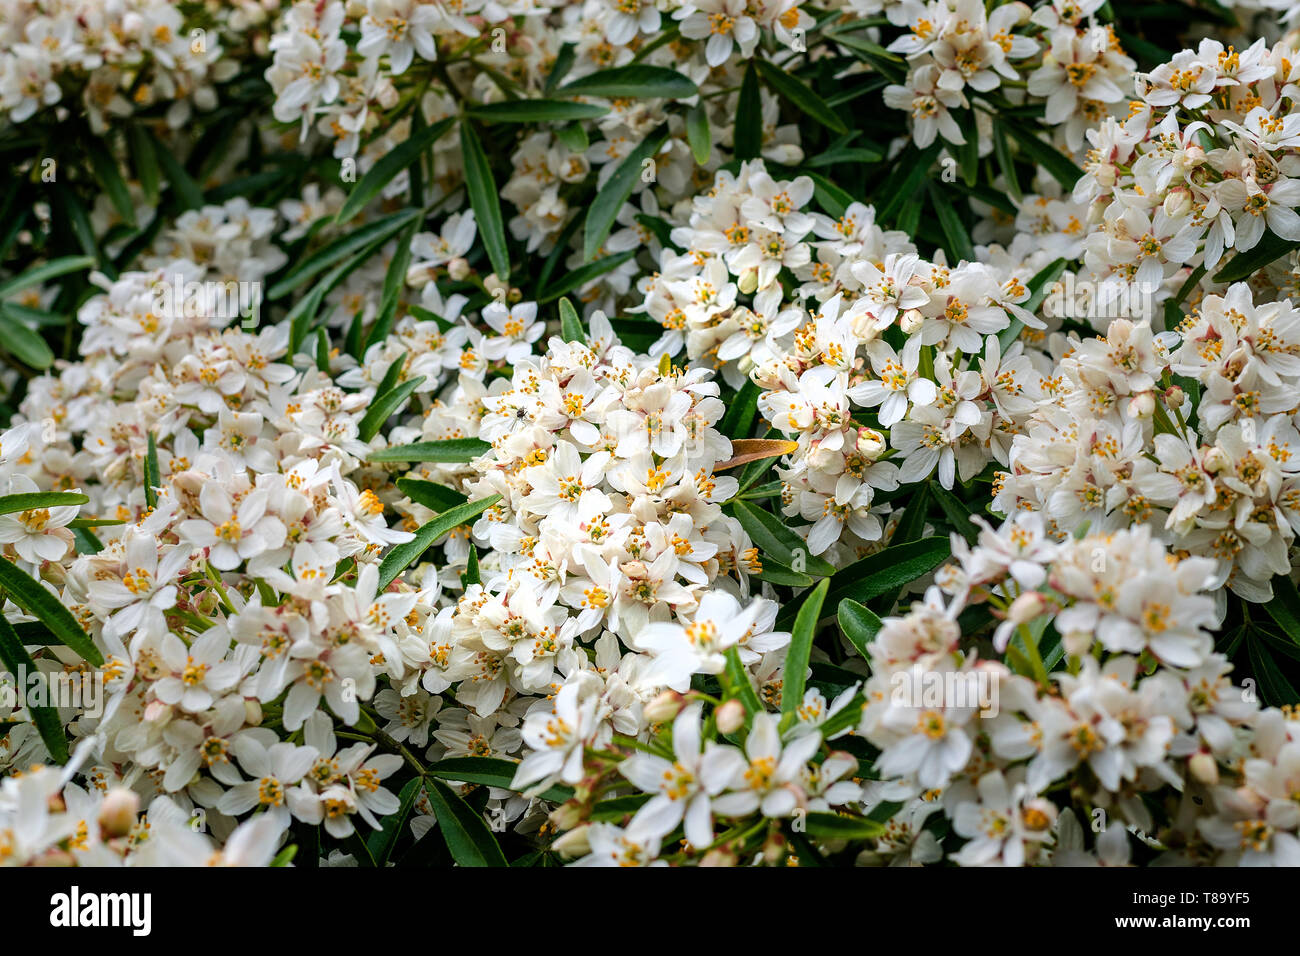 A close up view of a Choisya shrub in full bloom showing the clusters of star-shaped flowers Stock Photo